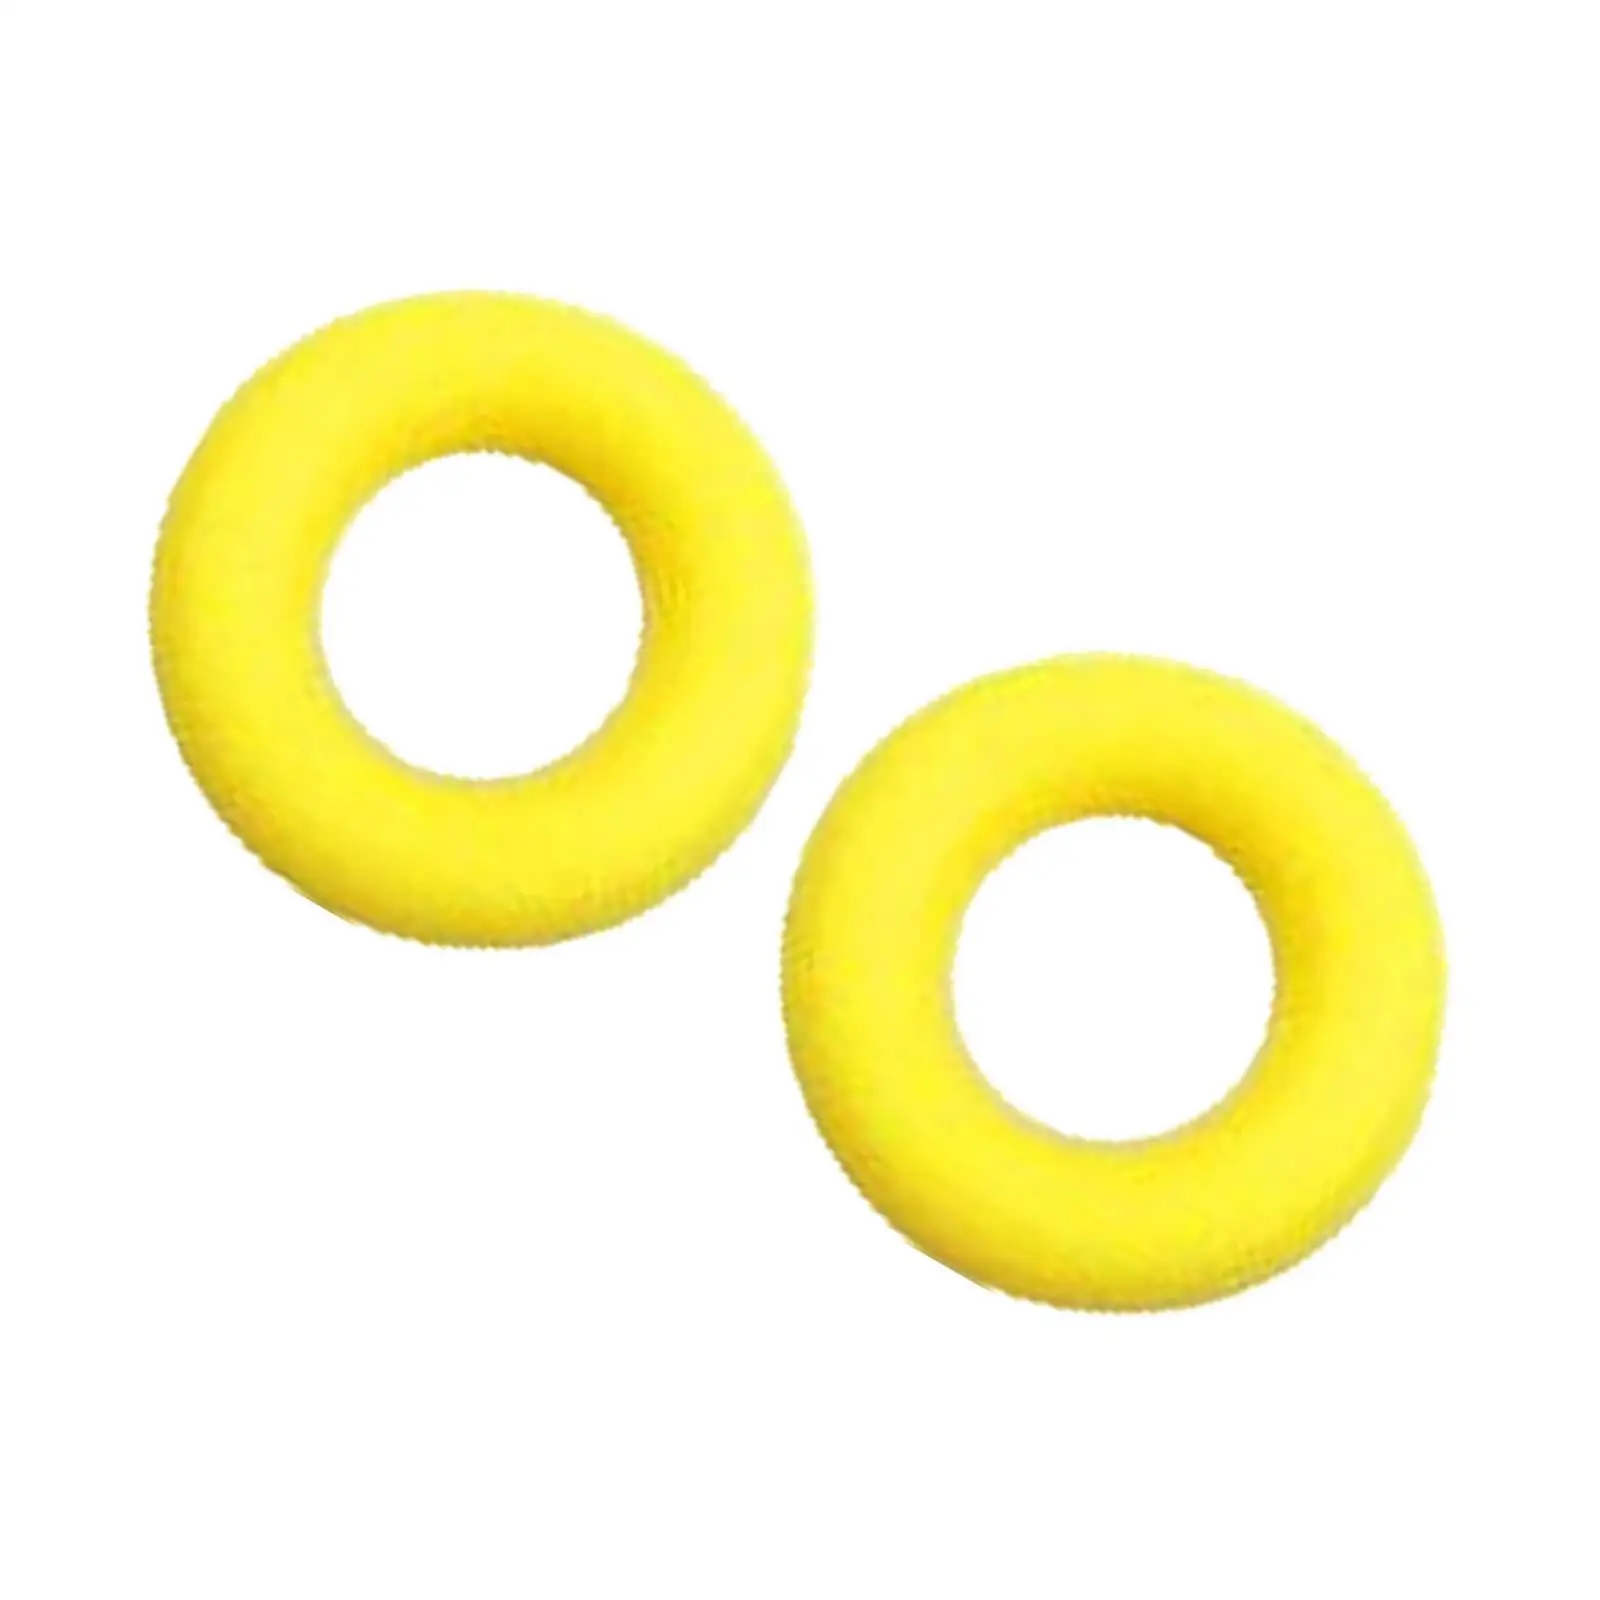 2Pcs Glasses Ear Grips Comfortable Round Ear Clips Eyeglass Leg Pads Silicone Anti Slip for Eyewear Spectacles Children Adults